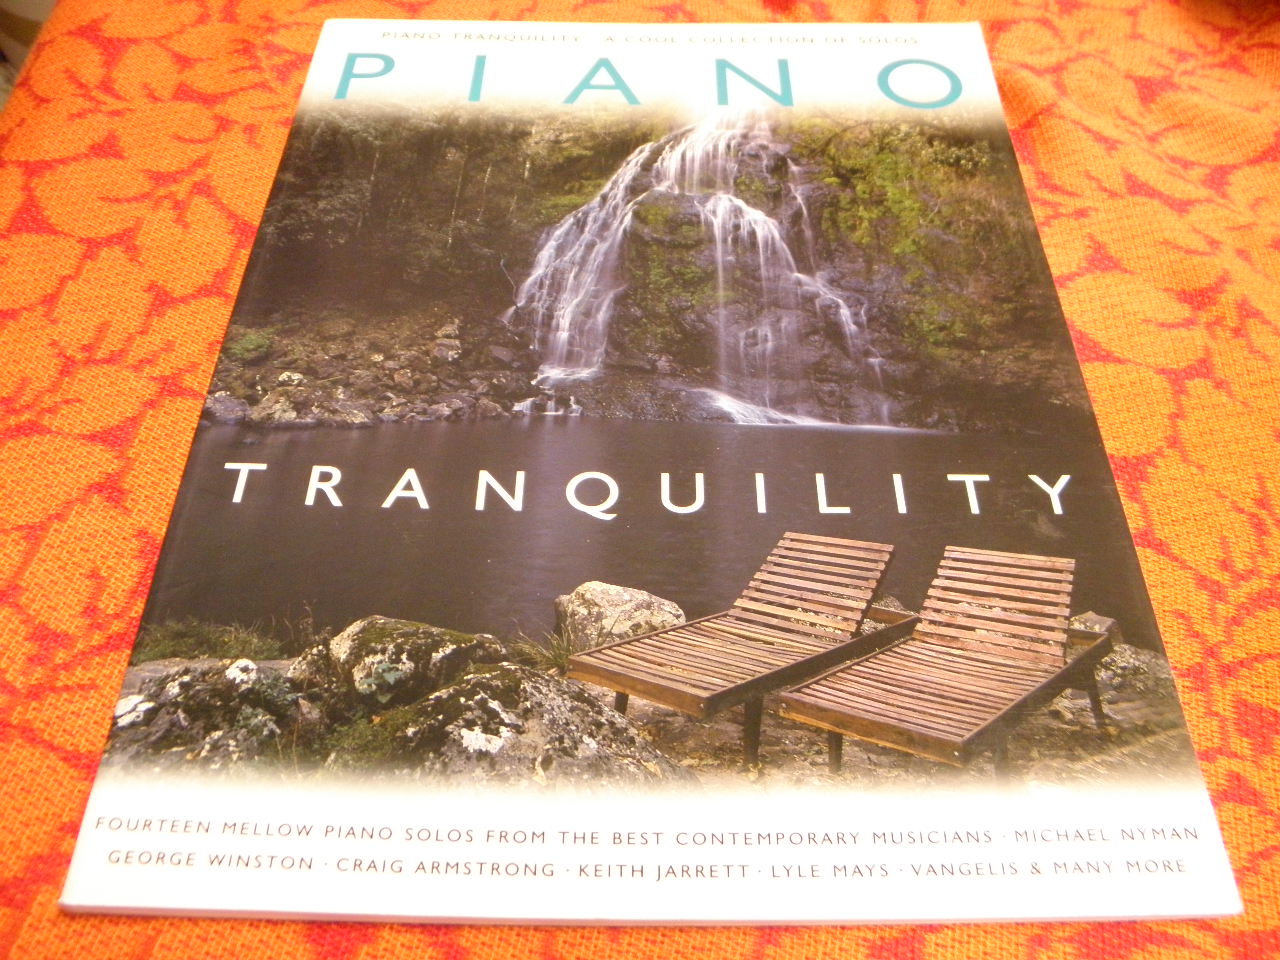  - PIANO TRANQUILITY.- A cool collection of solos. Fourteen mellow piano solos from the best contemporary musicians.